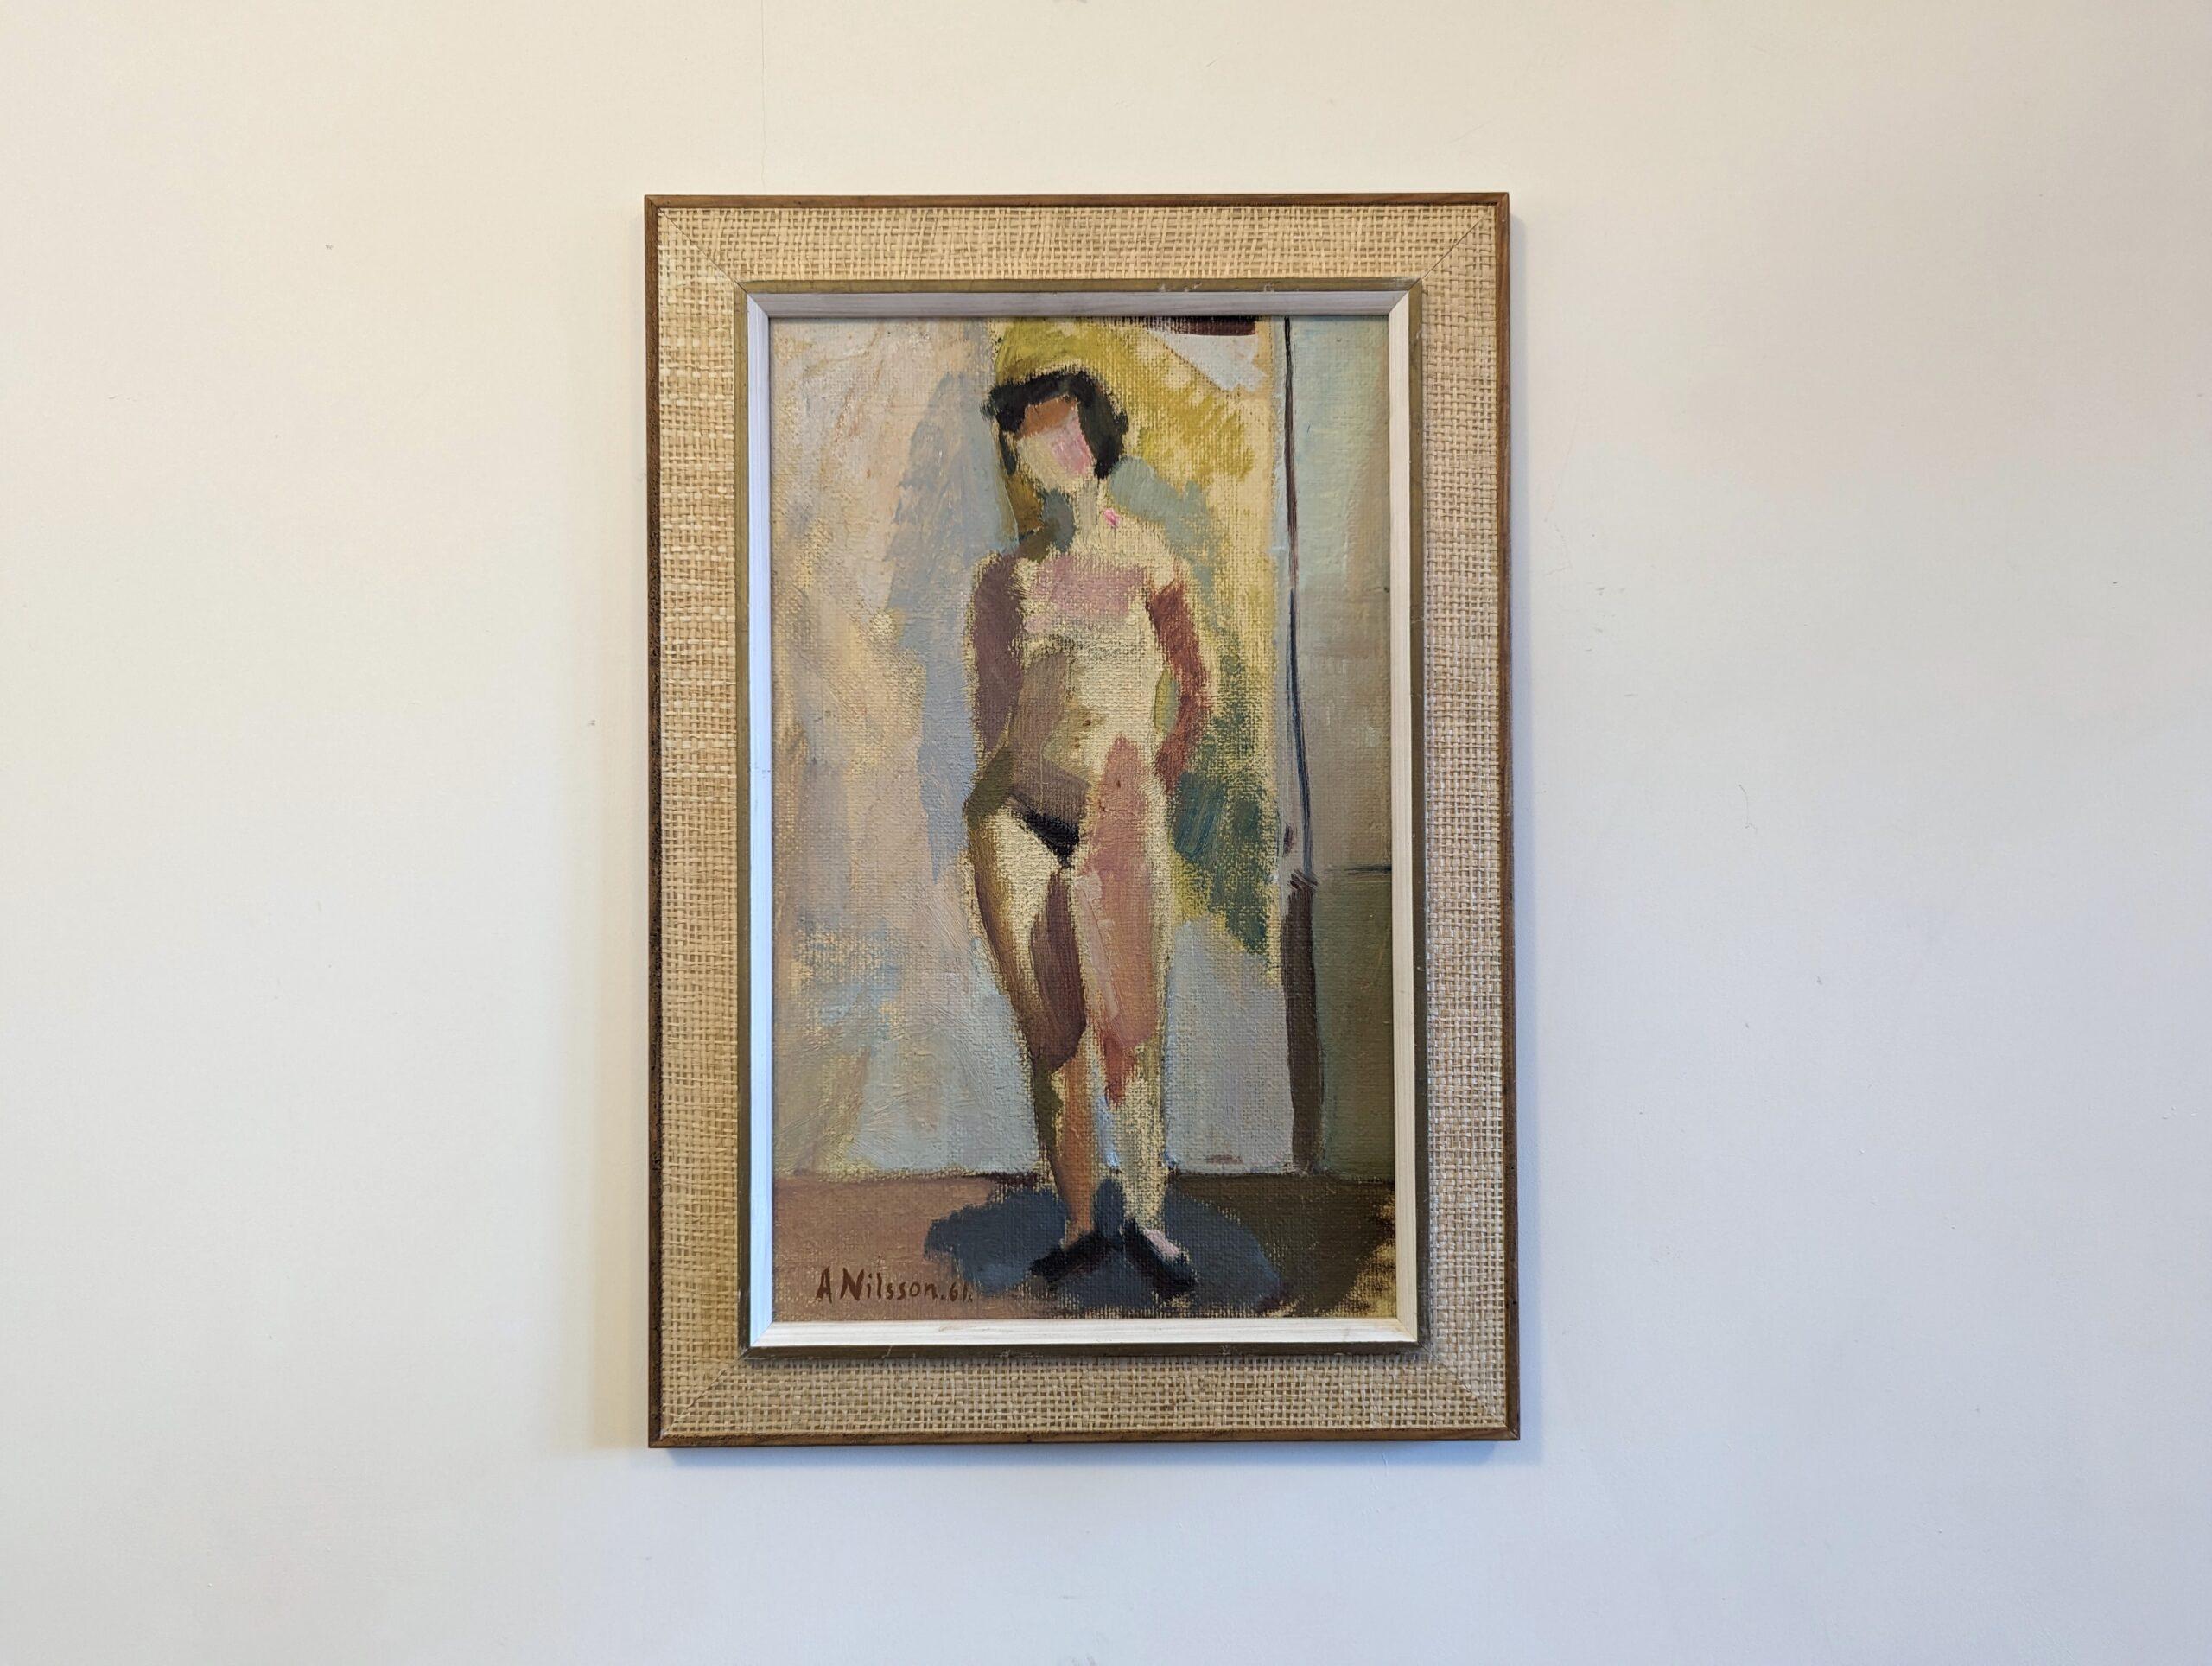 HELENE
Size: 55.5 x 38.5 cm (including frame)
Oil on canvas

A brilliant modernist-style figurative painting of a nude, executed in oil and dated 1961.

The composition captures a standing nude within a minimalist interior setting. Placed against